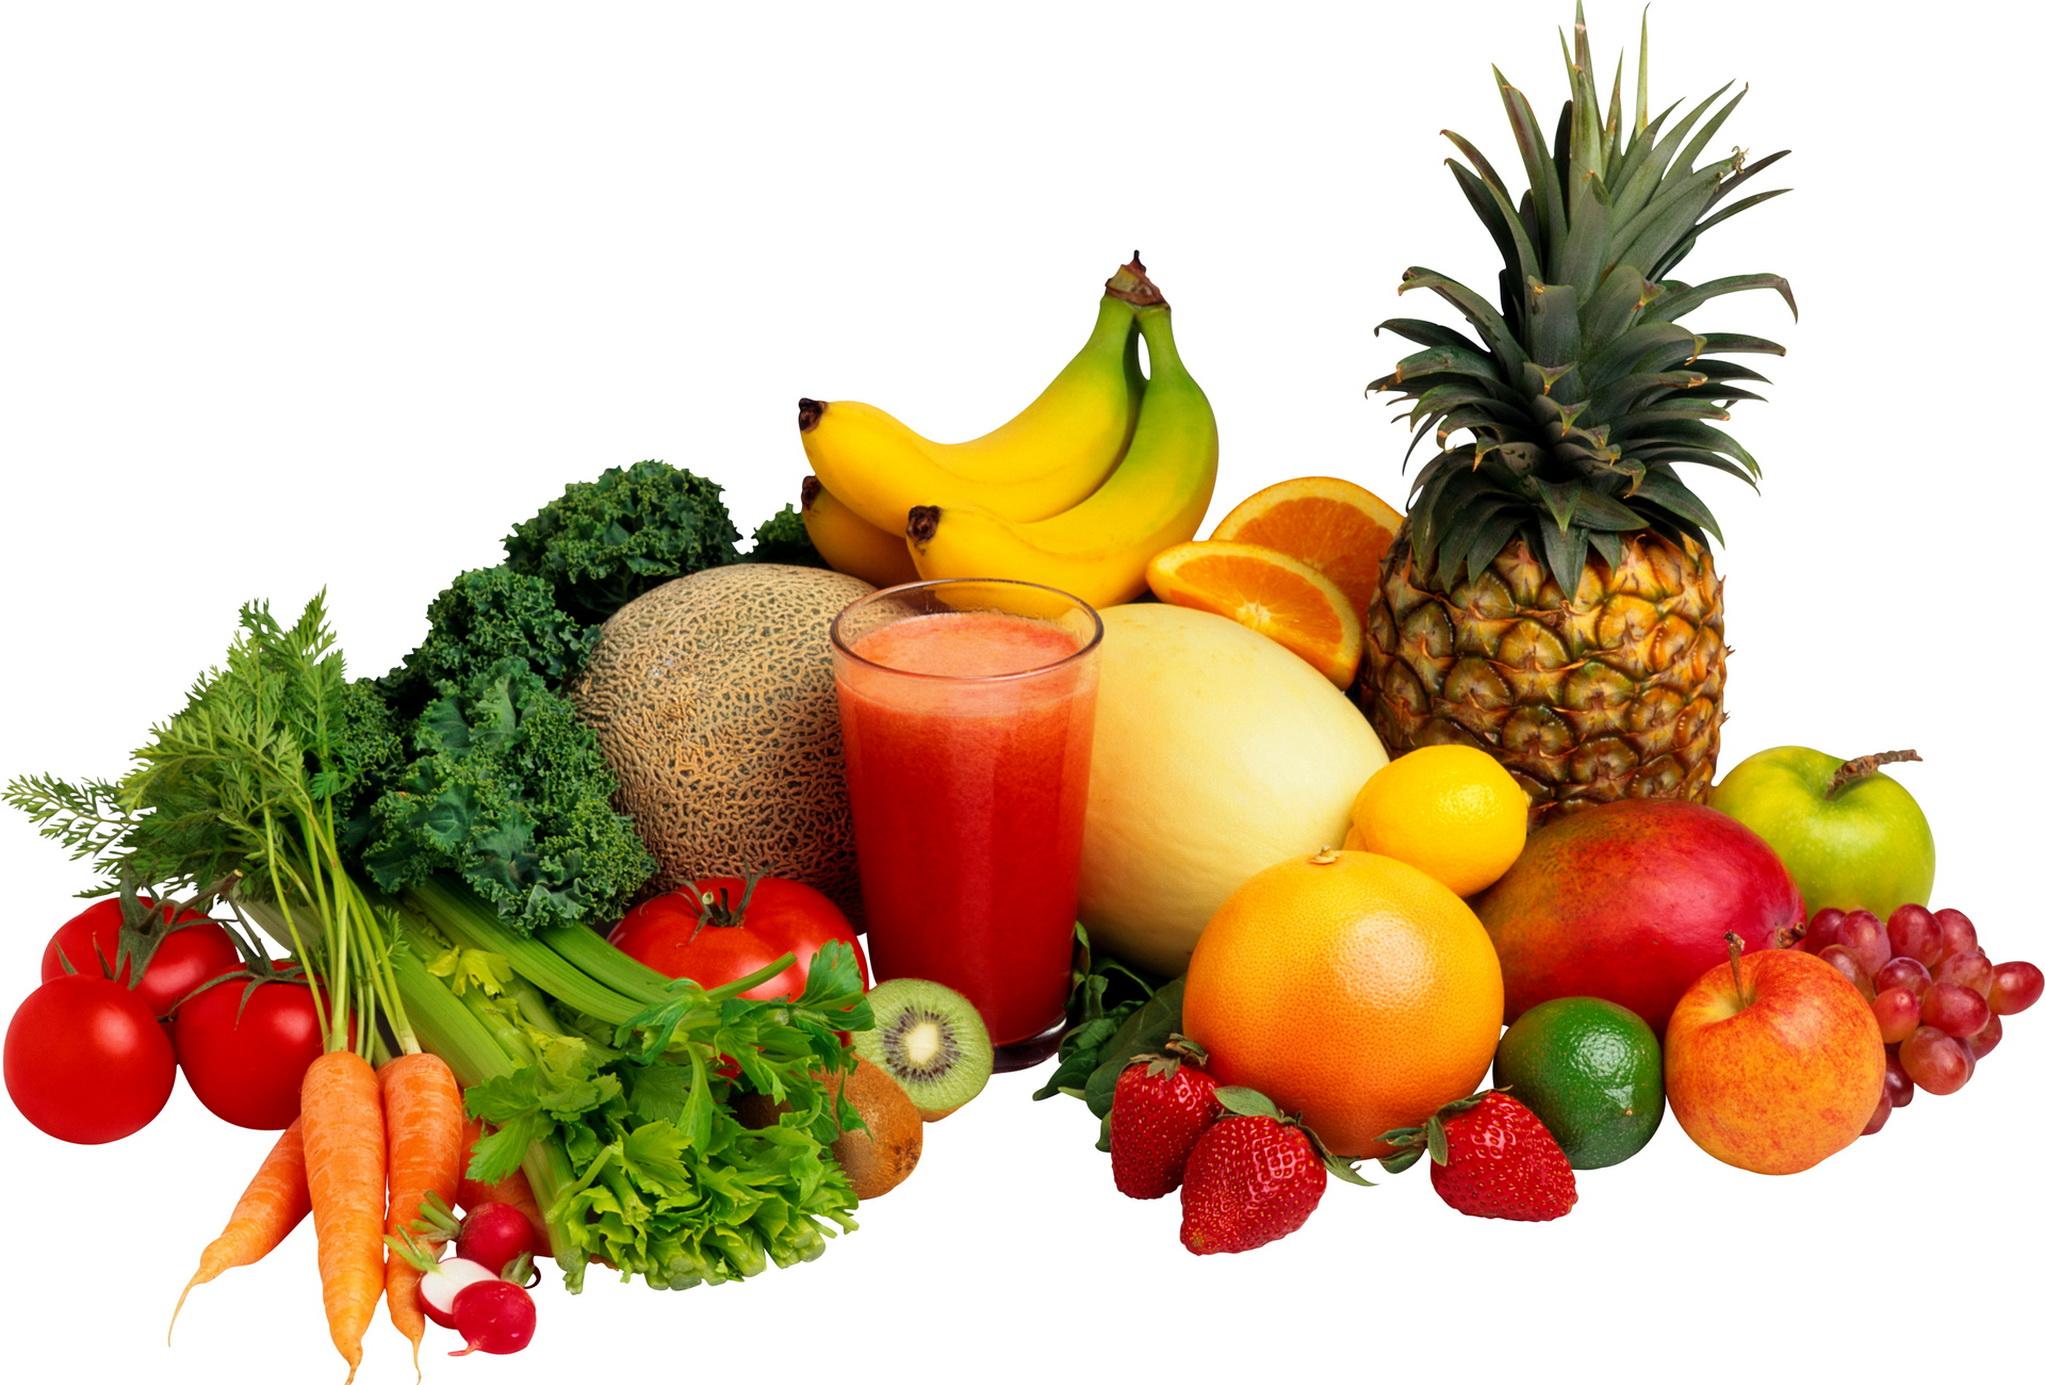 fruits for a healthy life wallpaper